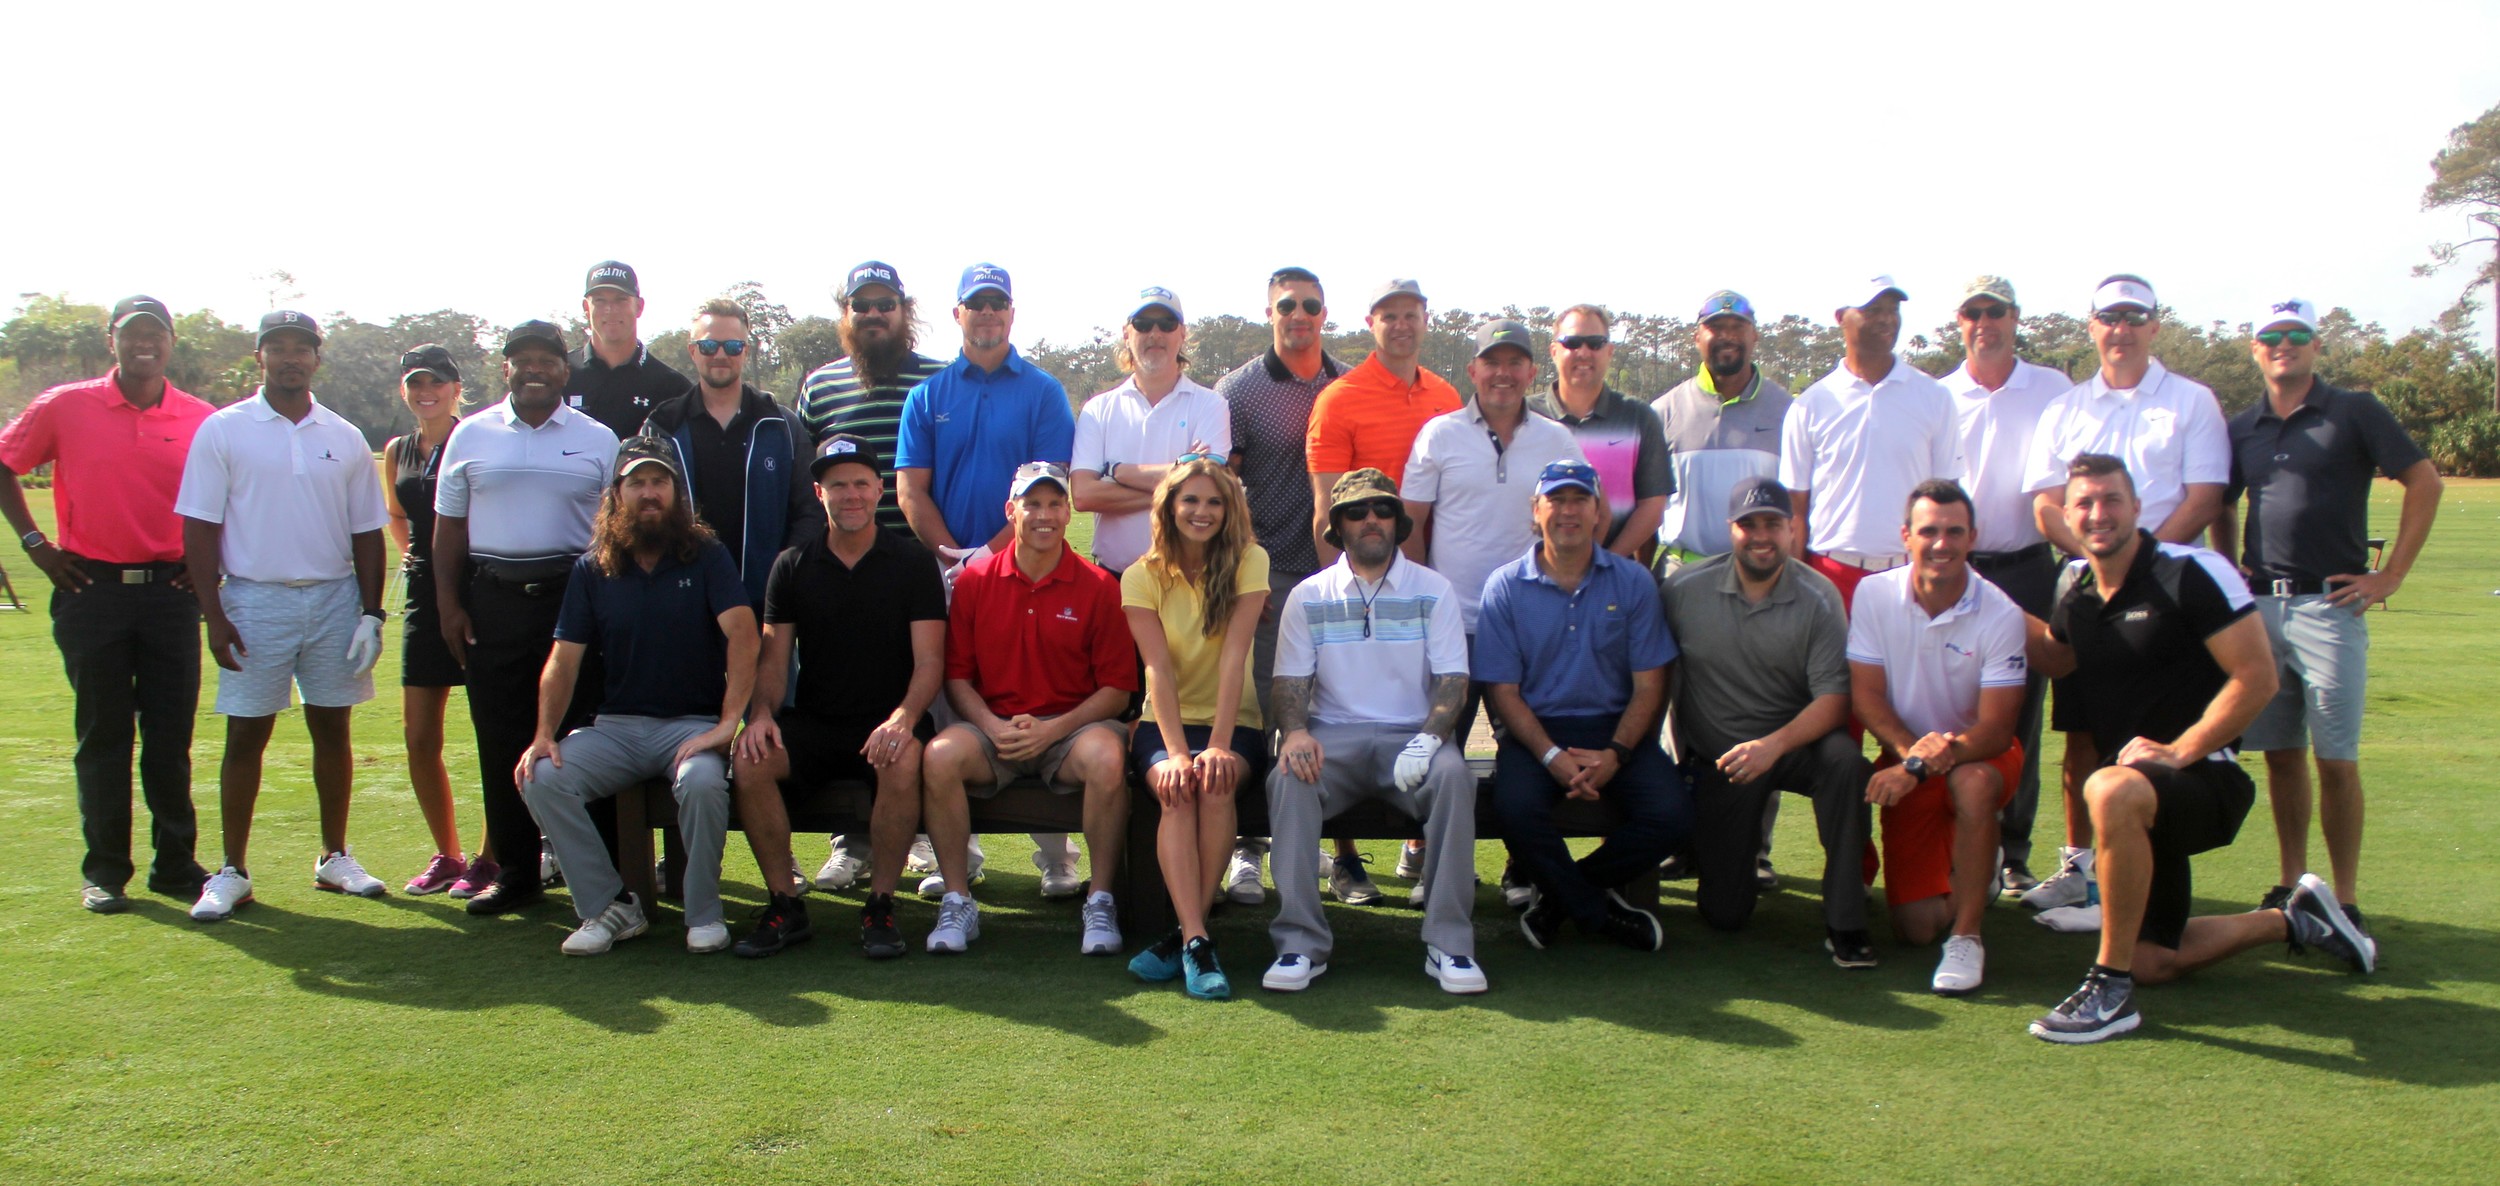 Last weekend the Tim Tebow Foundation hosted its 6th Annual Celebrity Golf Classic at TPC Sawgrass.